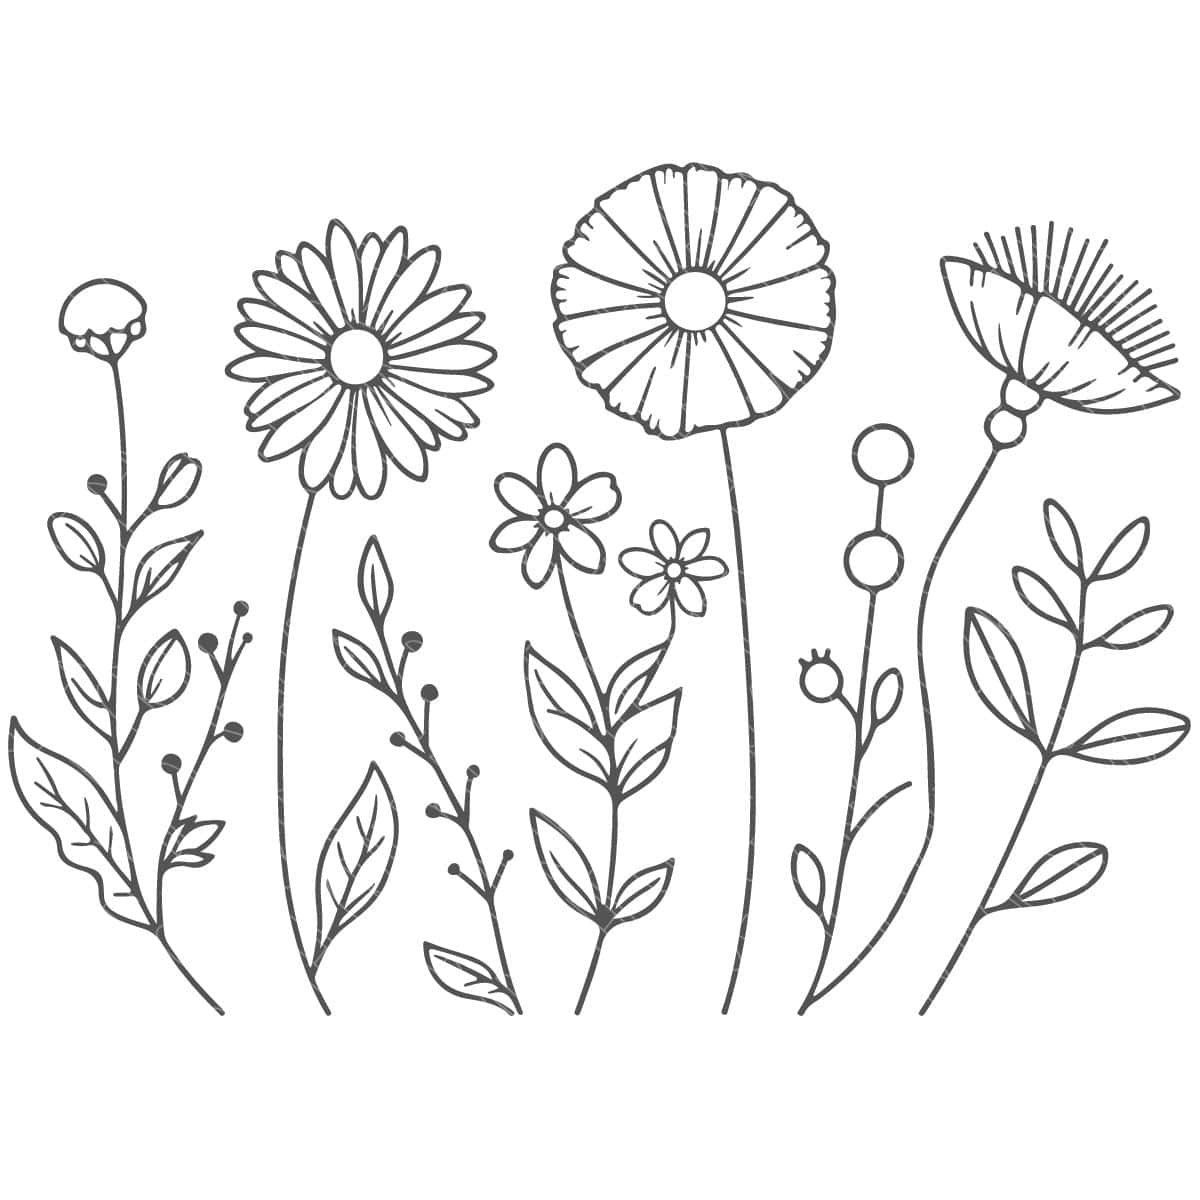 Wildflowers SVG Cut File	

			
		
	

		
			$3.00 – Buy Now Checkout
							
					
						
							
						
						Added to cart